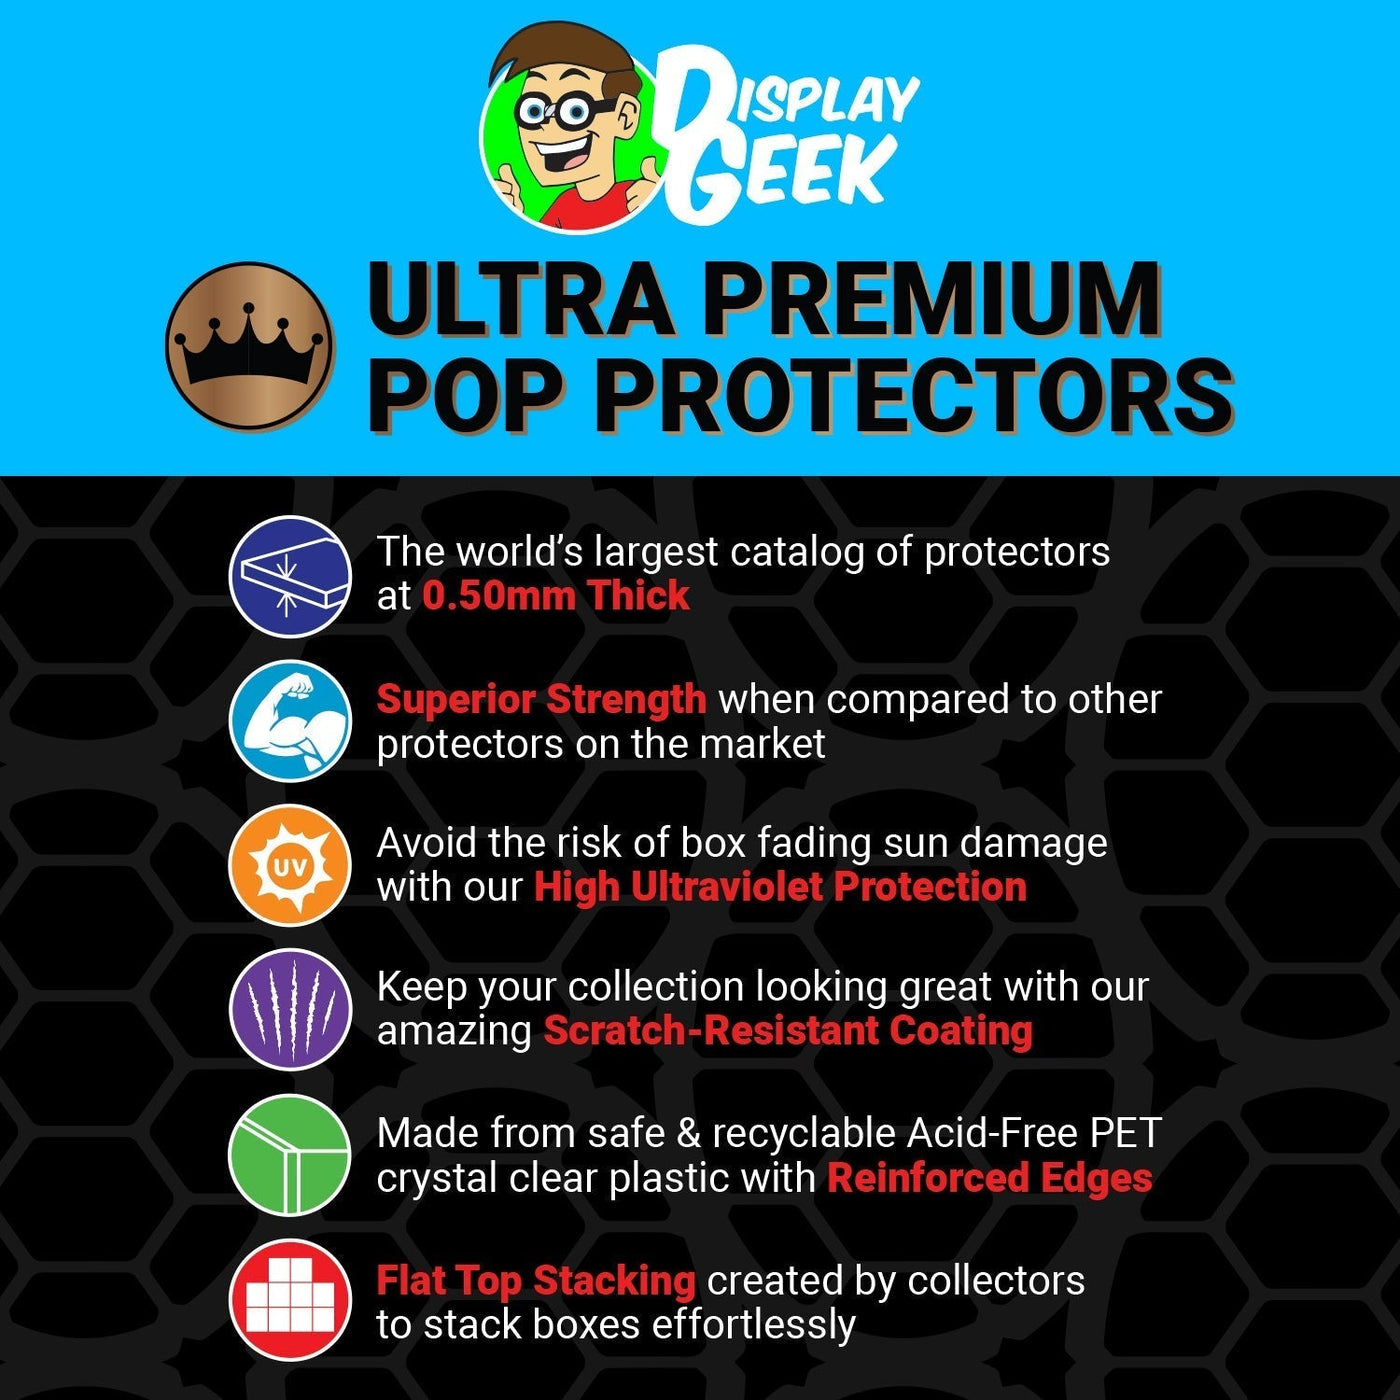 Pop Protector for Pop & Tee Hobgoblin Glow #959 Funko Box on The Protector Guide App by Display Geek